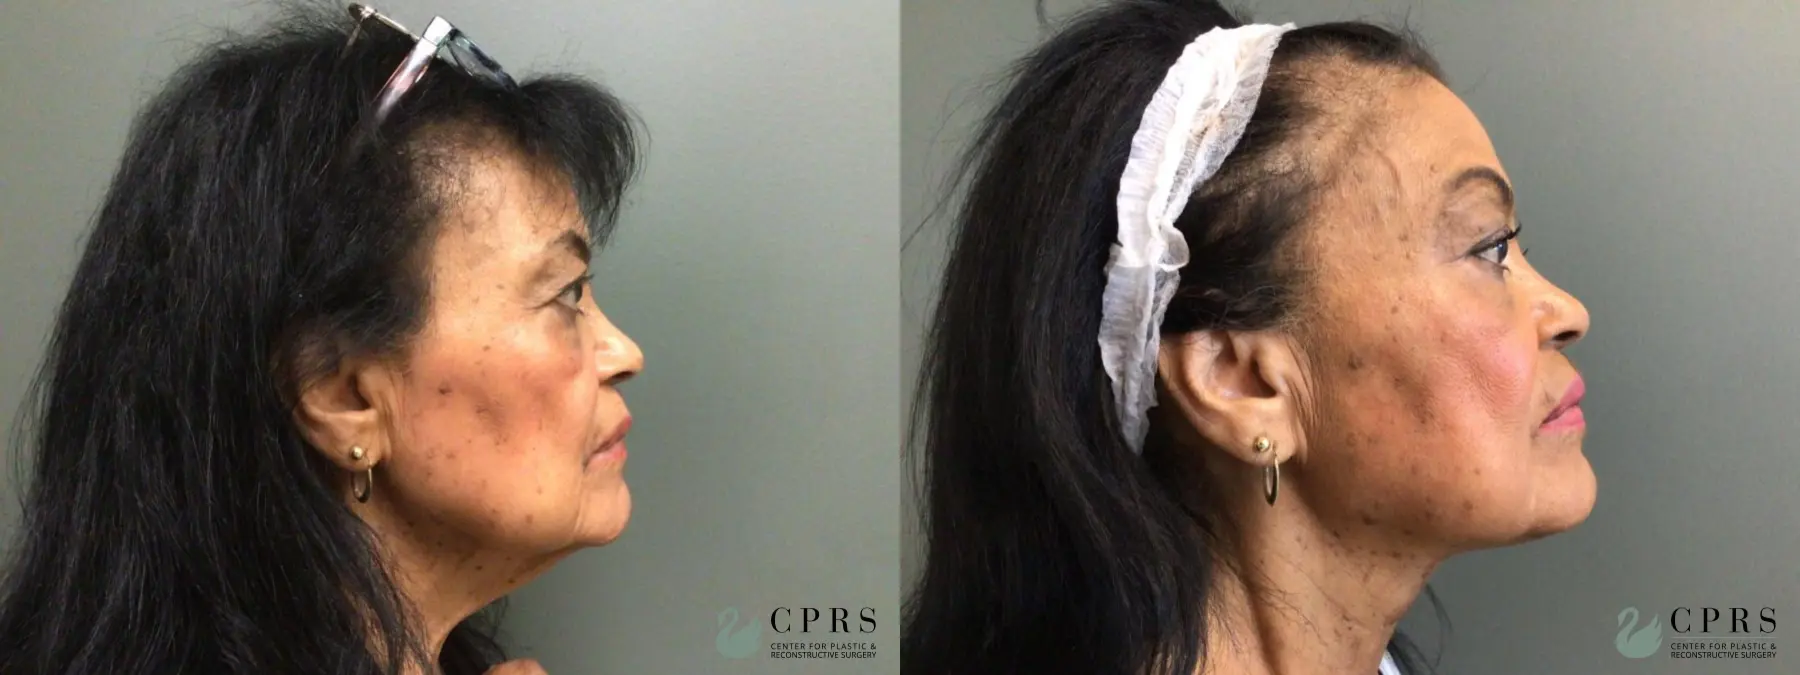 Neck Lift: Patient 3 - Before and After 2